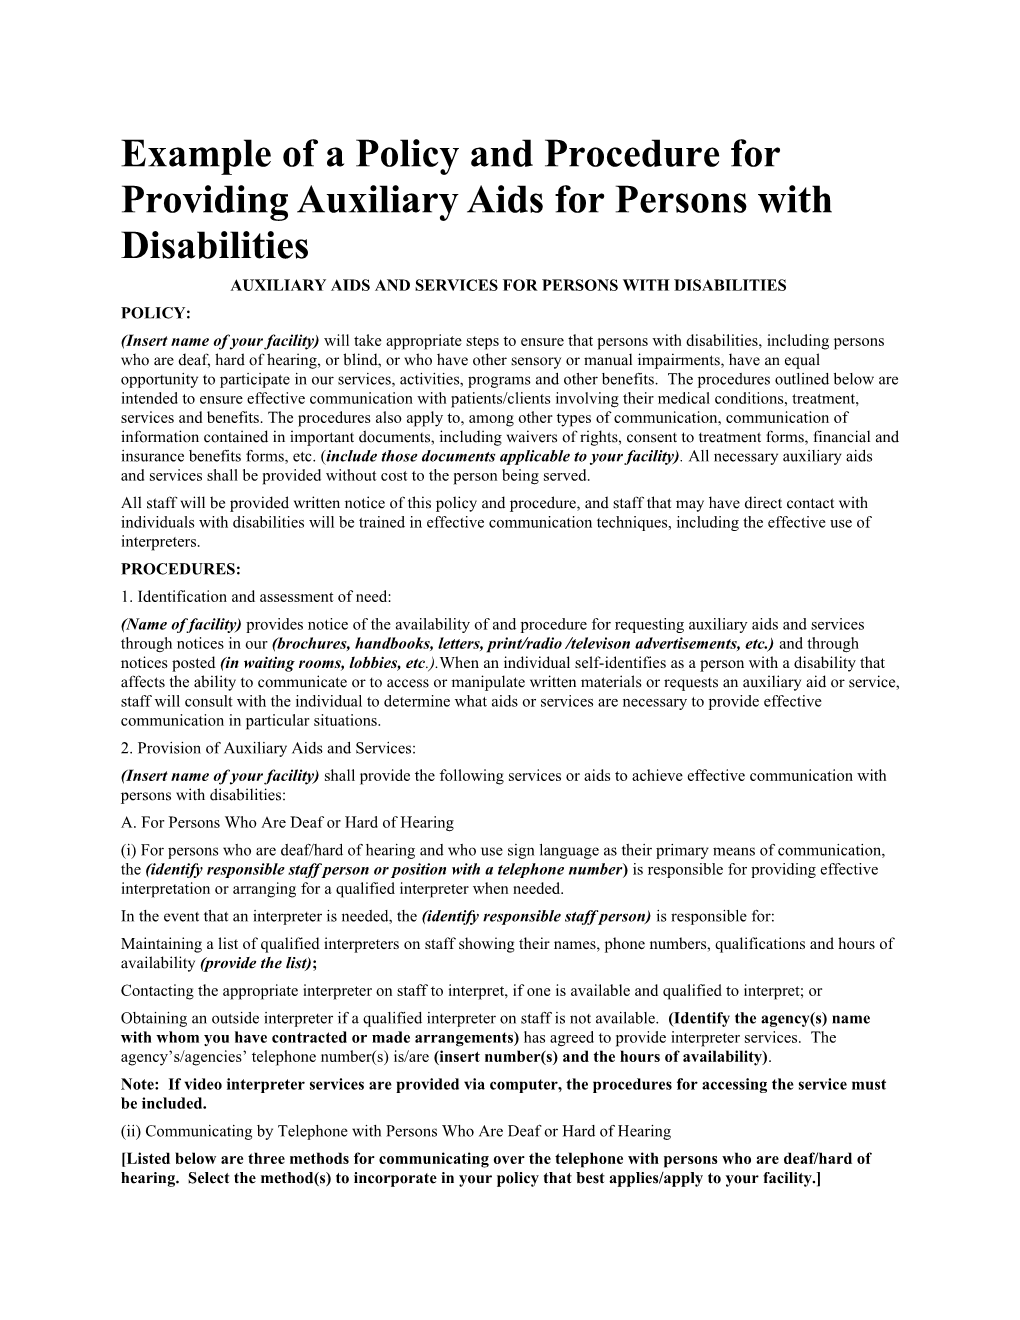 Auxiliary Aids and Services for Persons with Disabilities